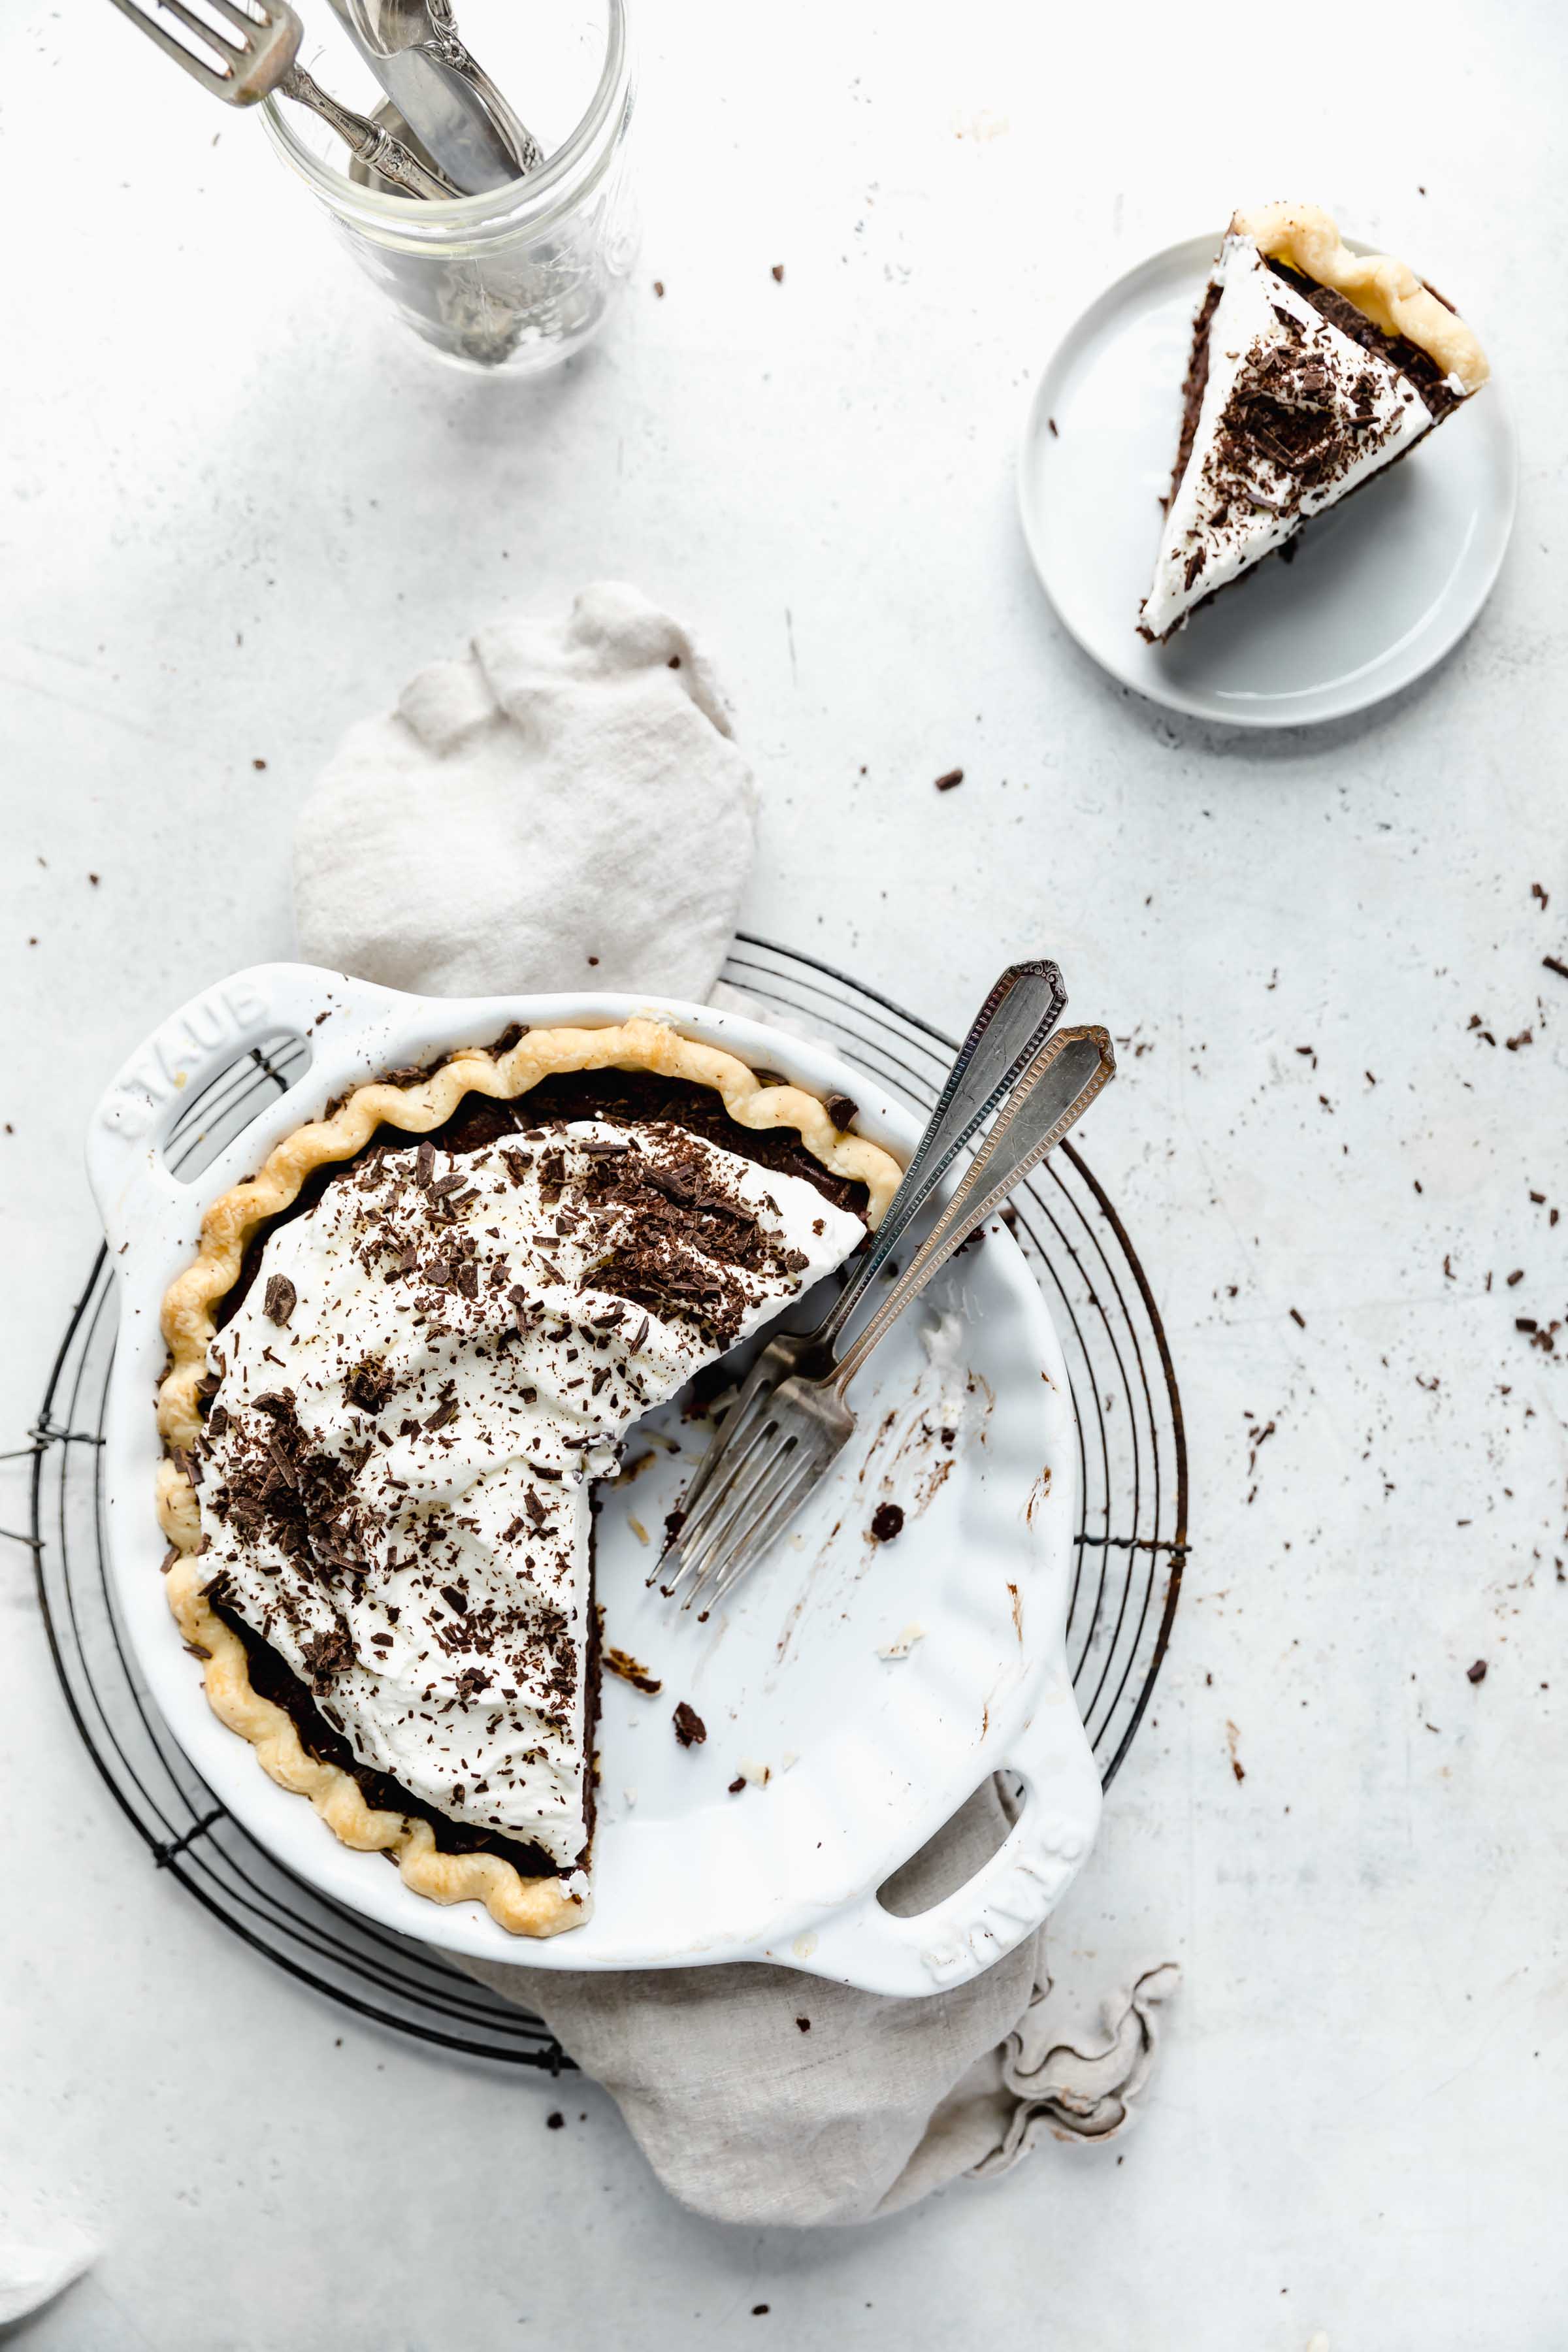 Rich, fudgy, and oh so chocolateyy this chocolate cream pie is a must for your thanksgiving dessert spread this year!